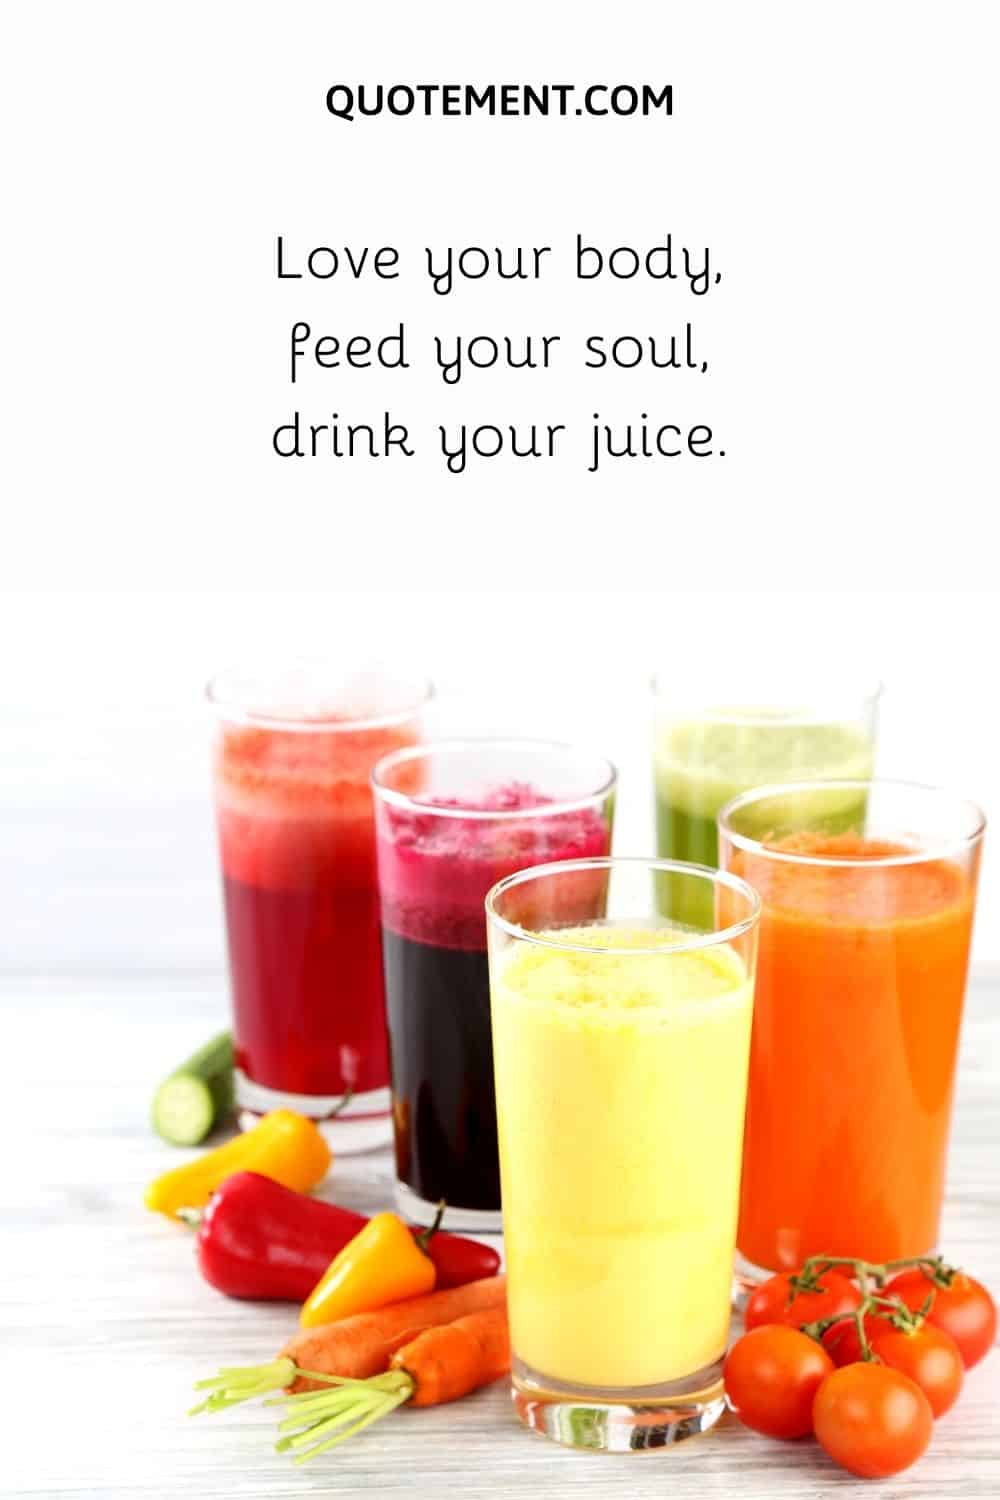 Love your body, feed your soul, drink your juice